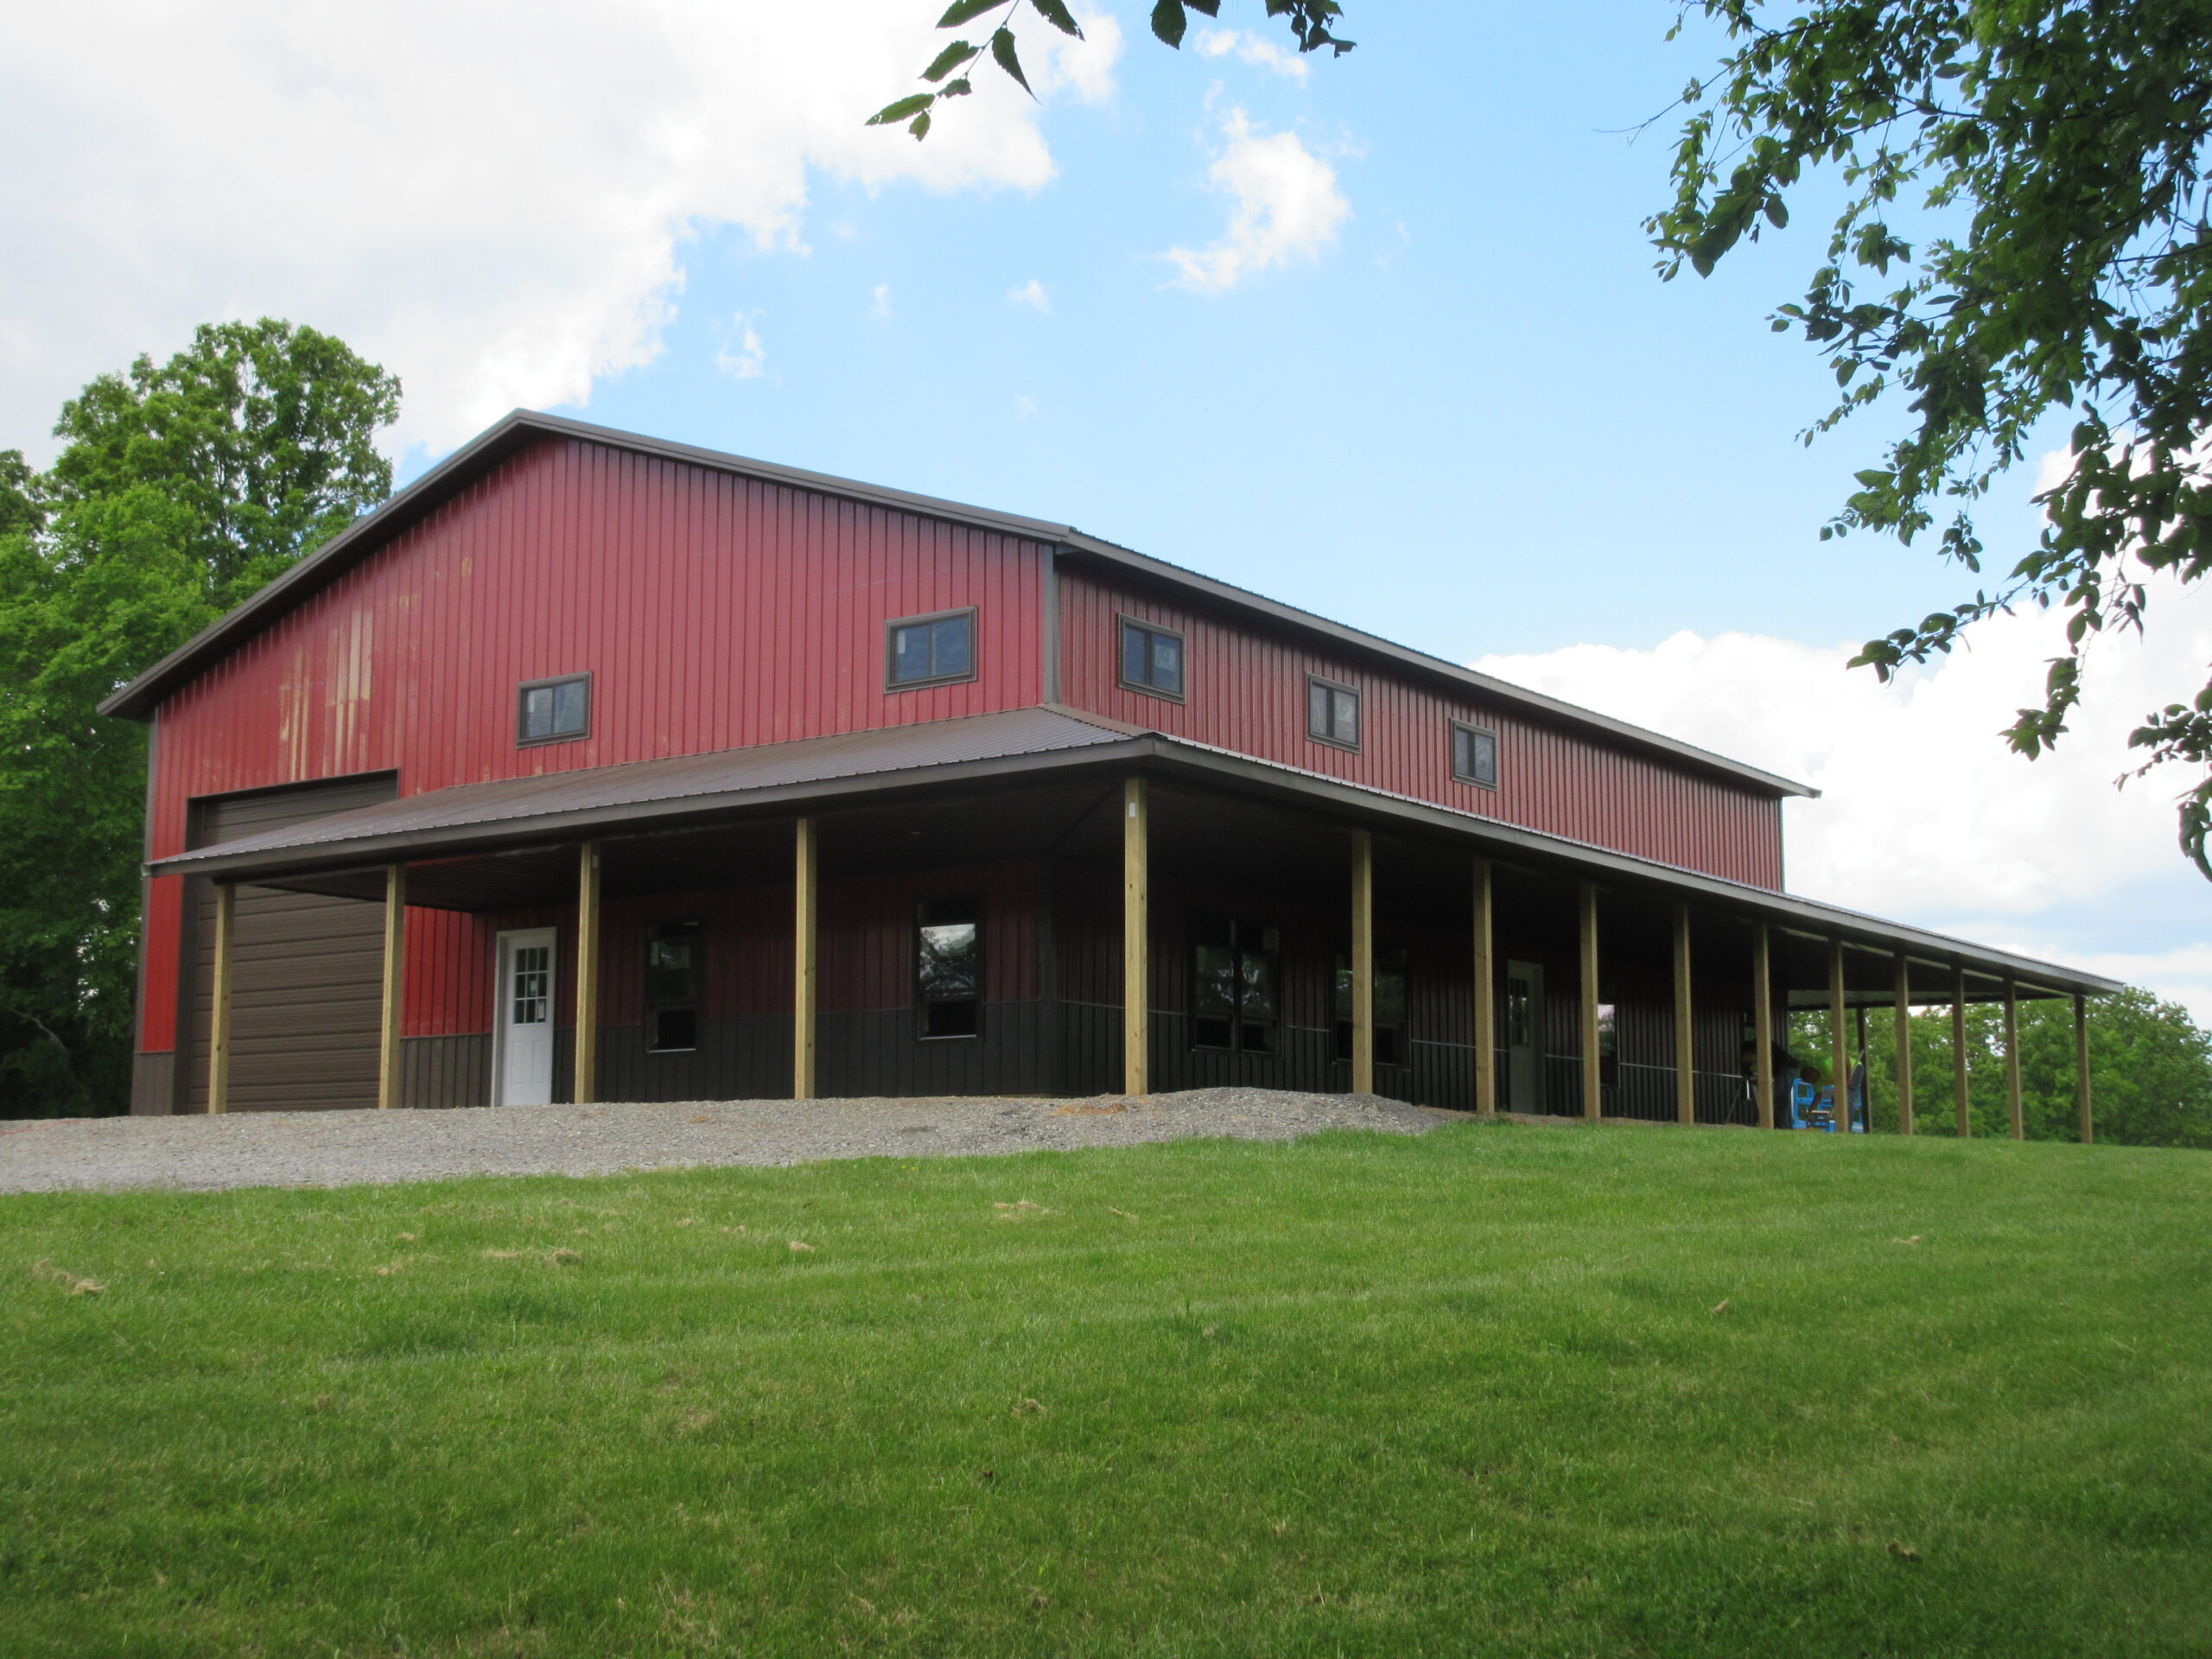 Red and black barn style home with wrap around porch in Marion, Illinois